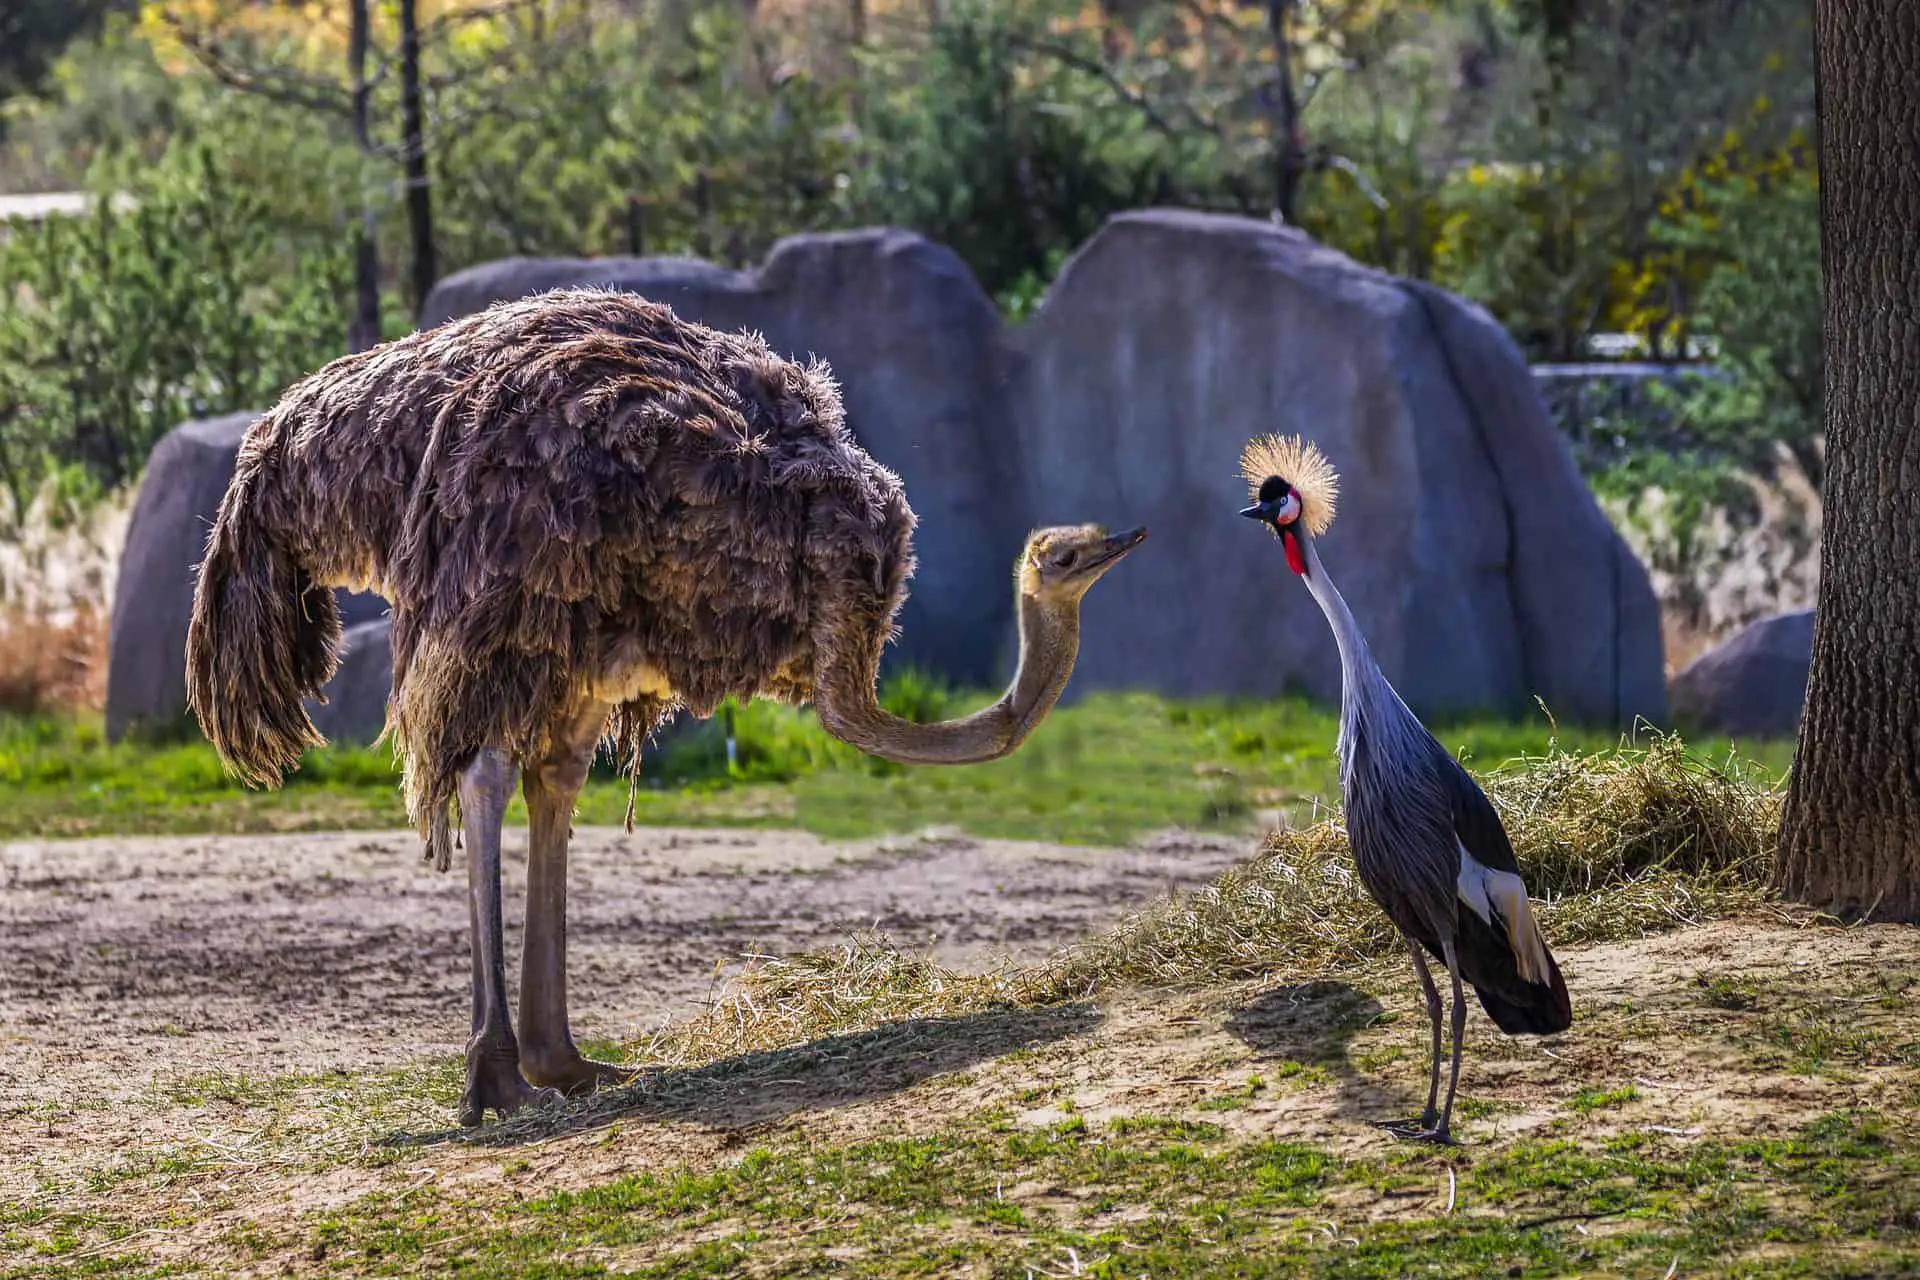 Do Ostriches Live In Zoos